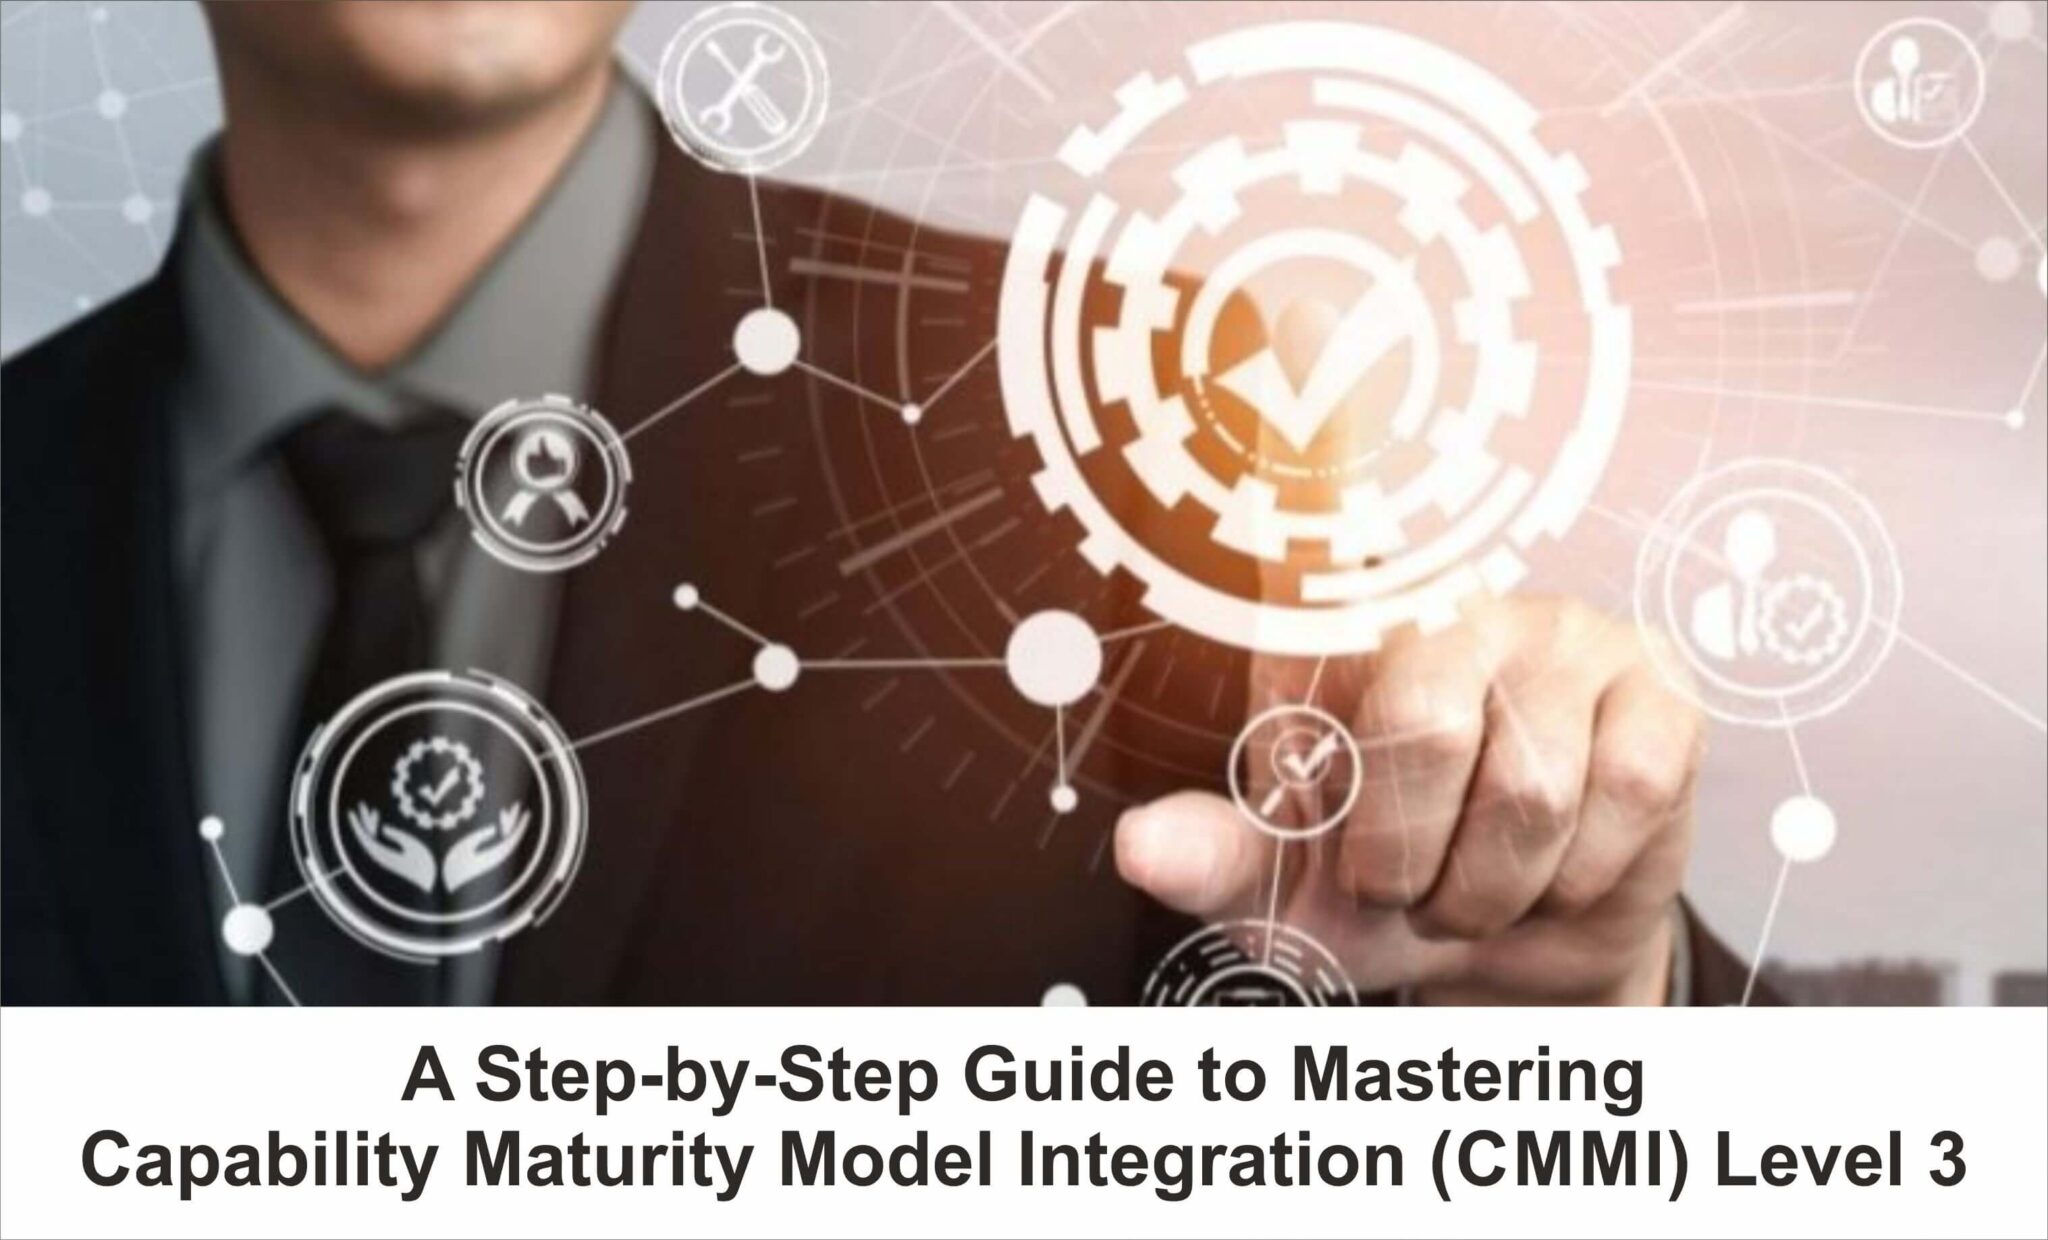 A Step-by-Step Guide to Mastering Capability Maturity Model Integration (CMMI) Level 3